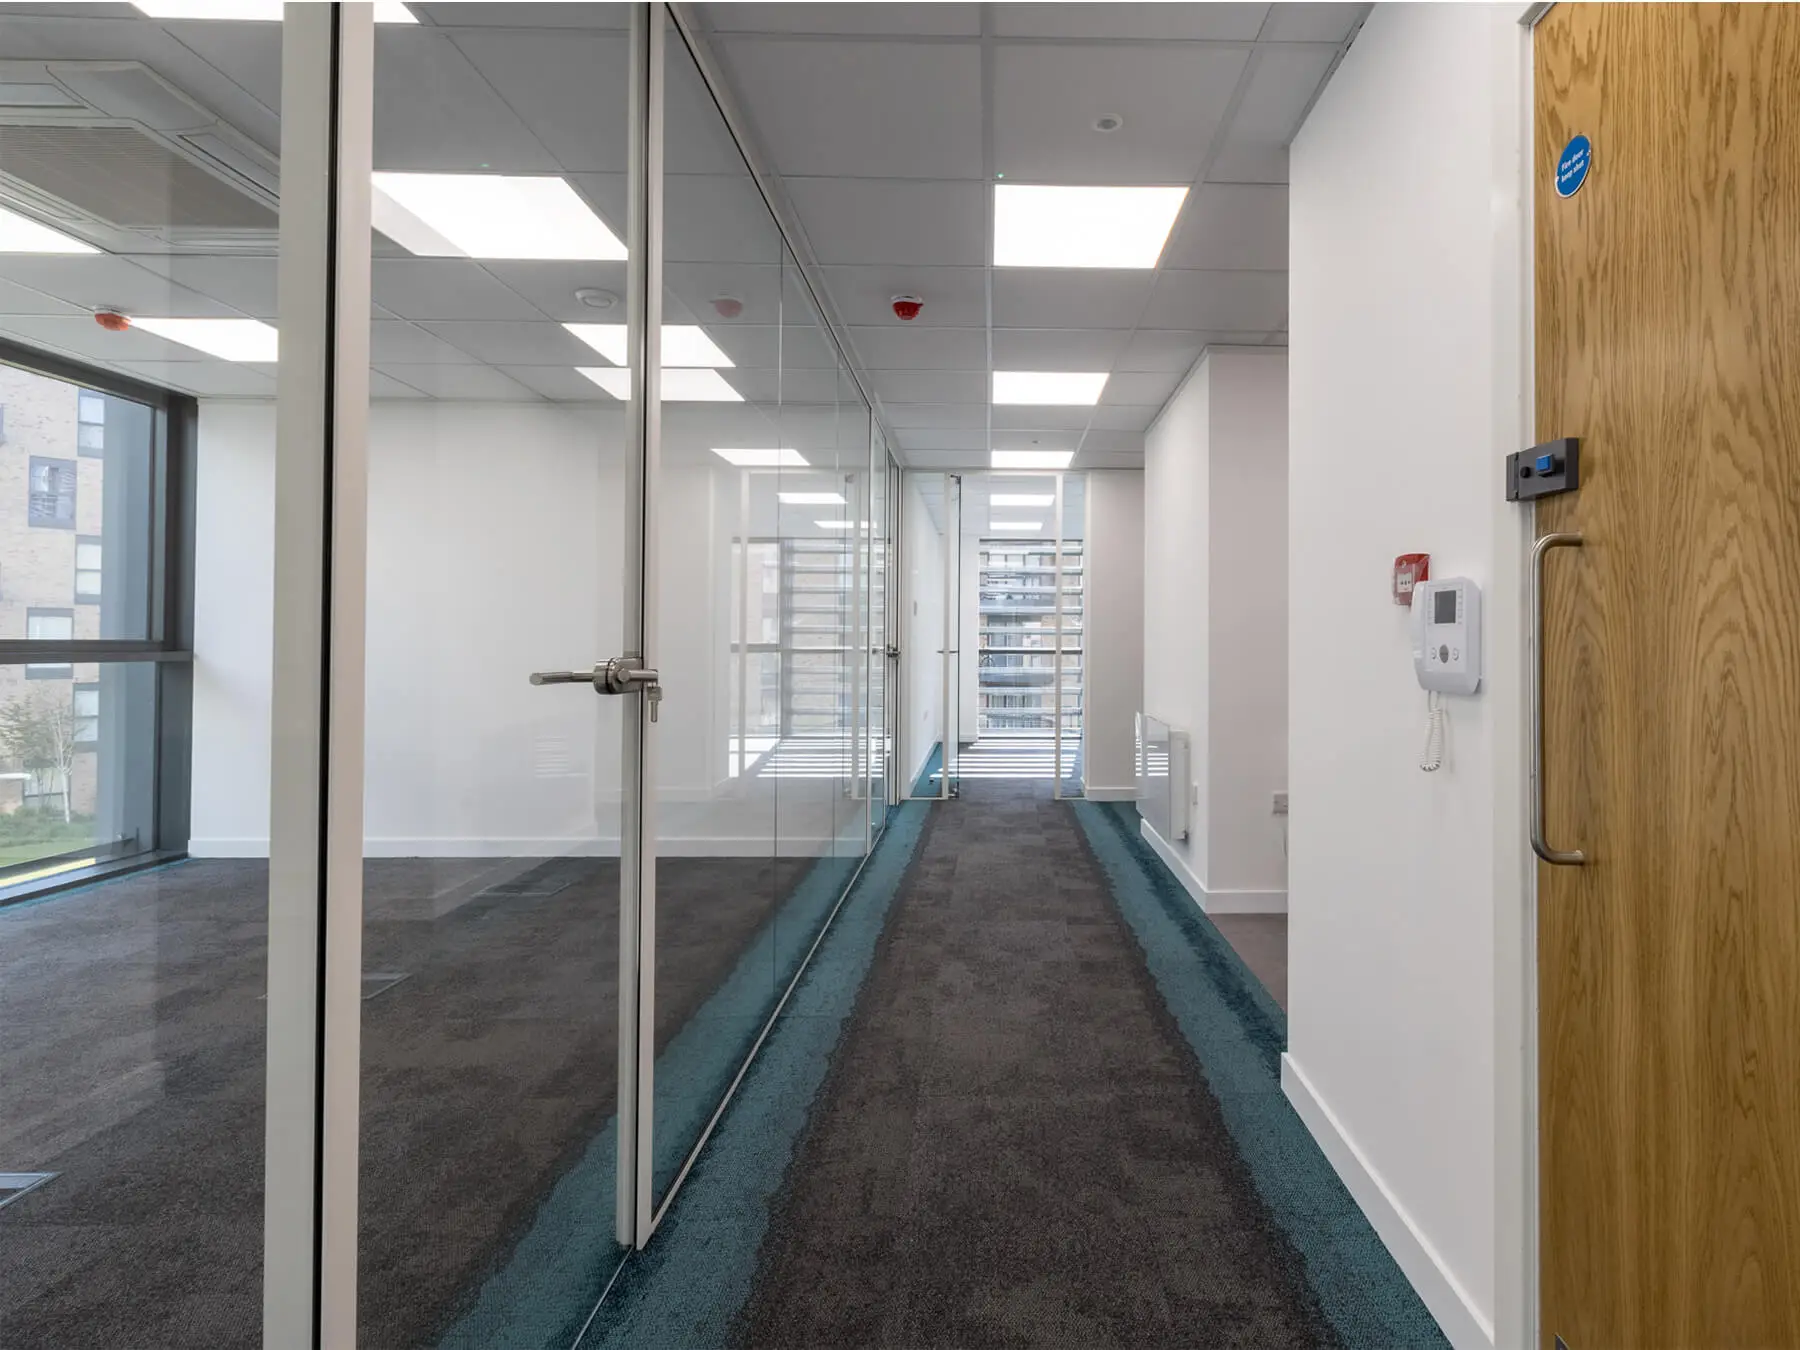 Office lobby with designer floors and single glazed partiton with framed doors